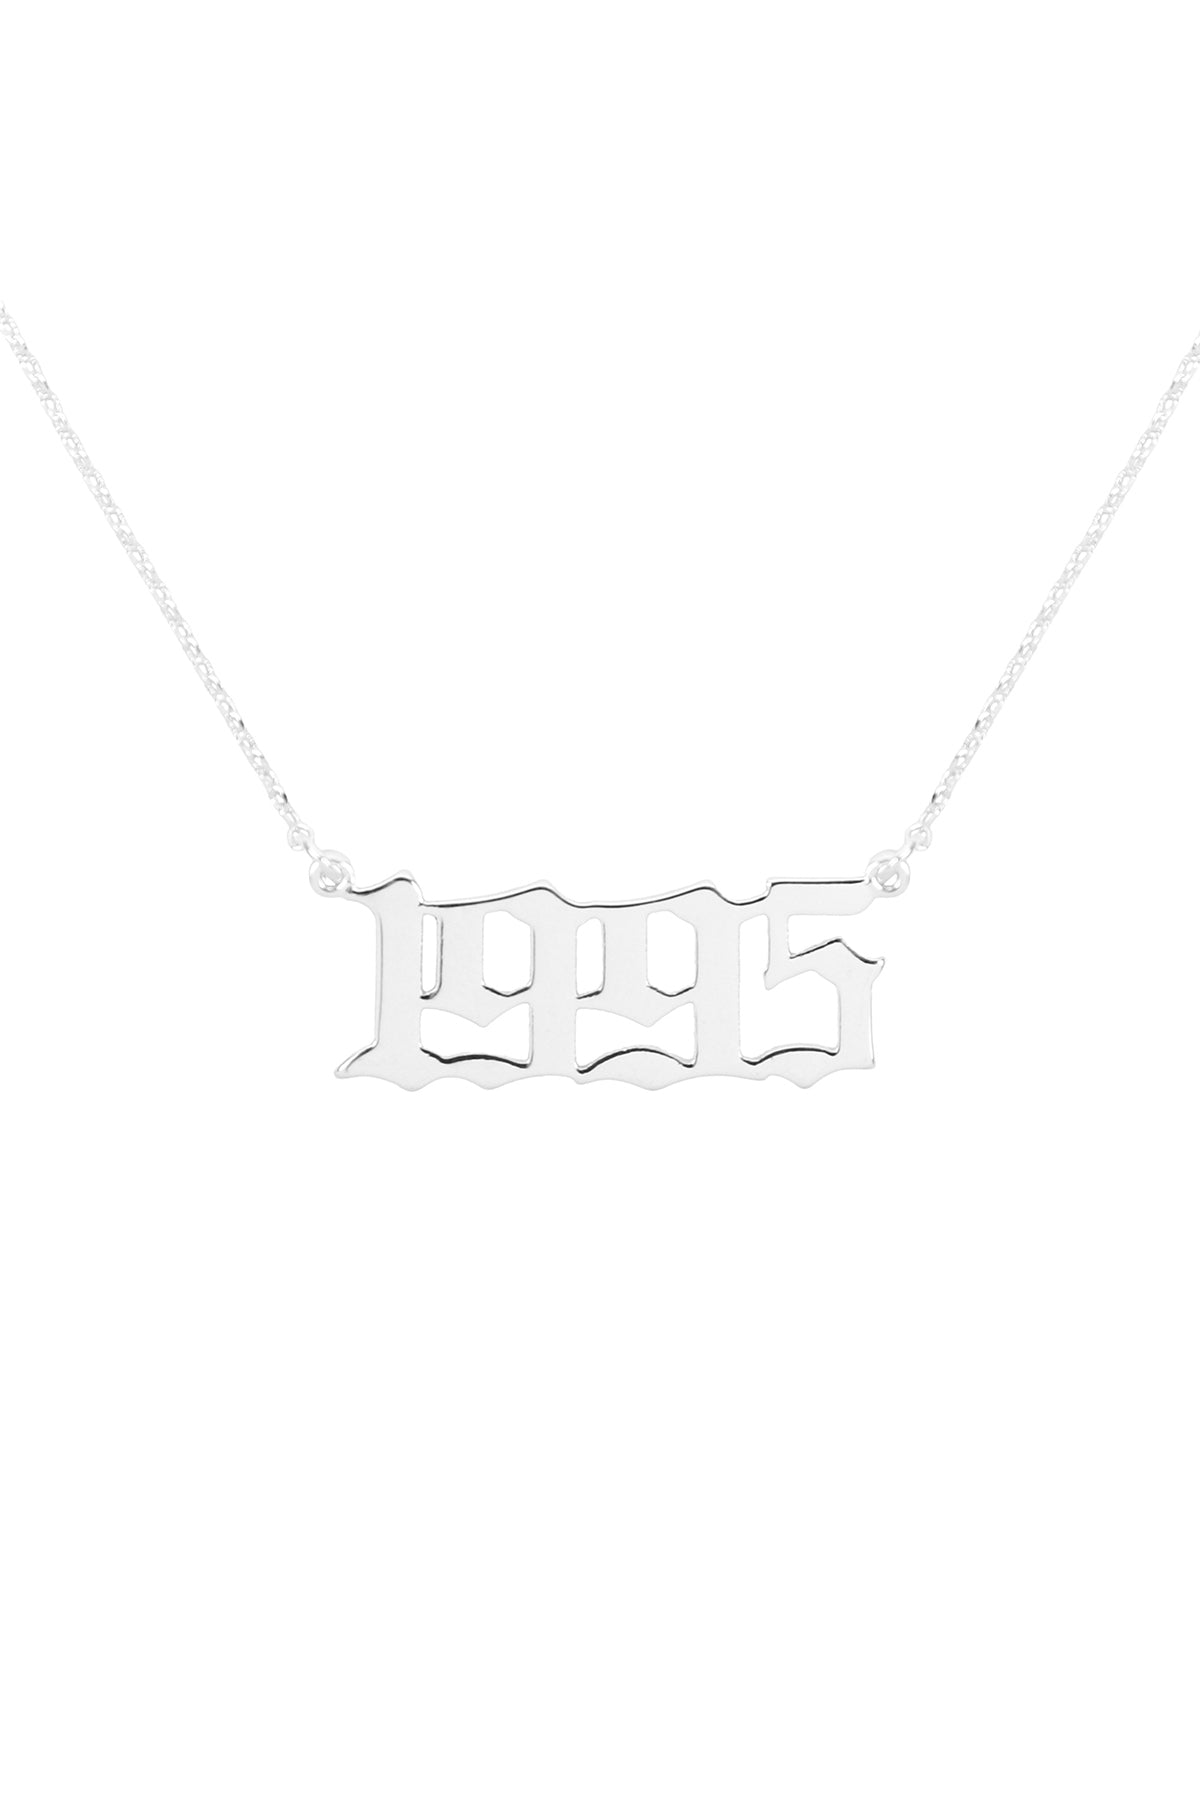 "1995" BIRTH YEAR PERSONALIZED NECKLACE